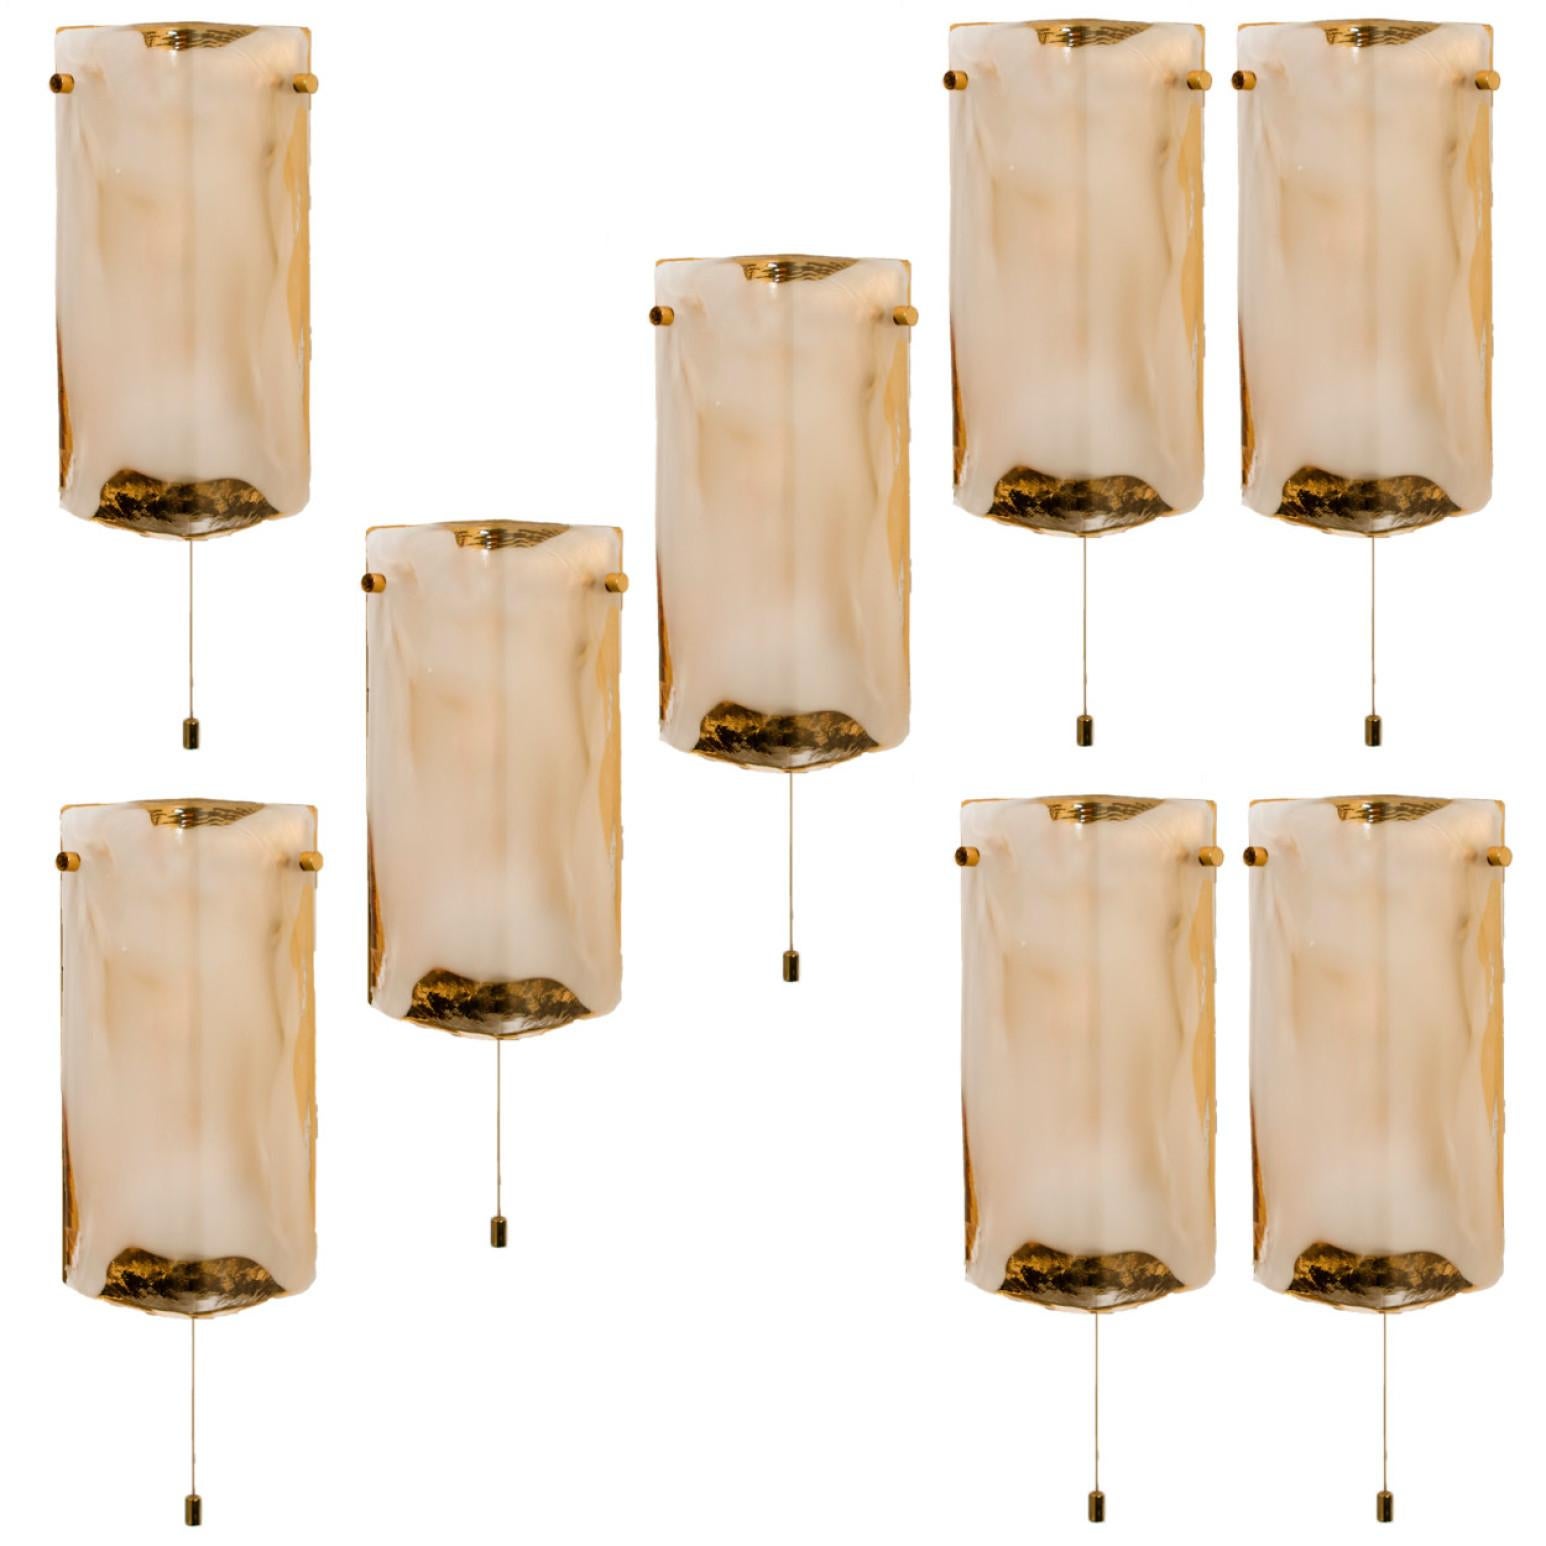 Pair high-end wall sconces made of hand blown clear and white Murano glass on a brass hardware designed and produced by J.T. Kalmar, Austria in the 1960s. Minimalistic design executed with a taste for excellence in craftsmanship. Statement